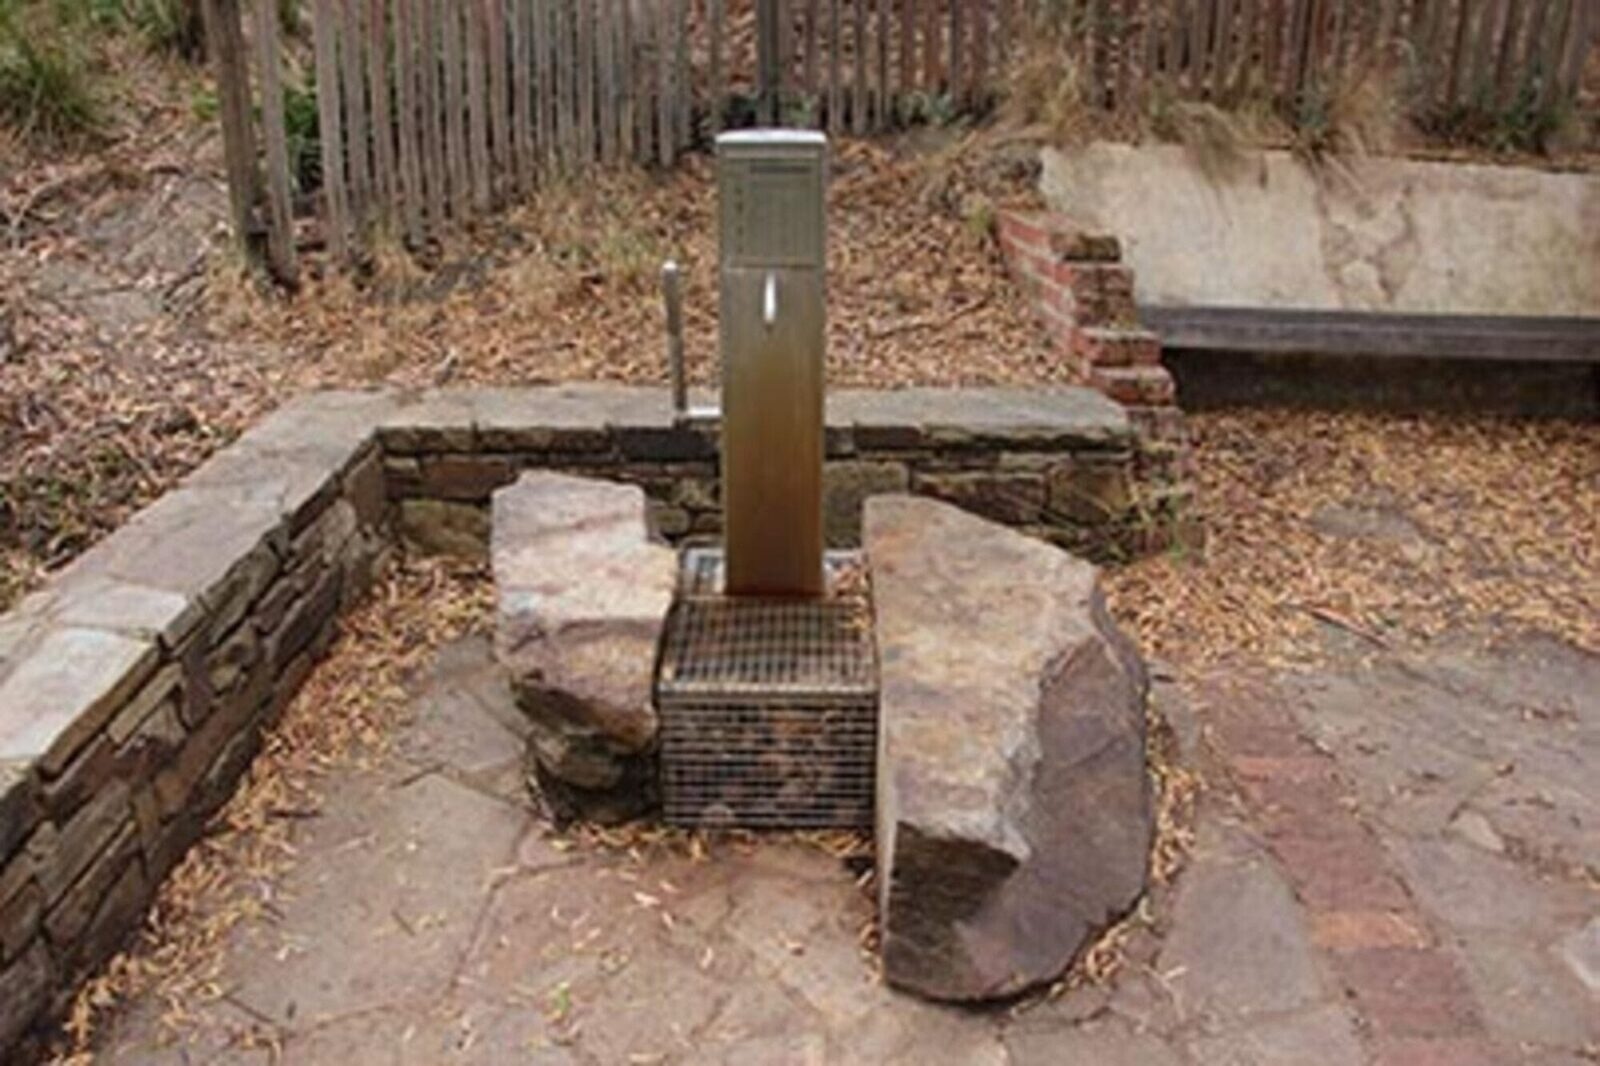 A tap surrounded by rocks